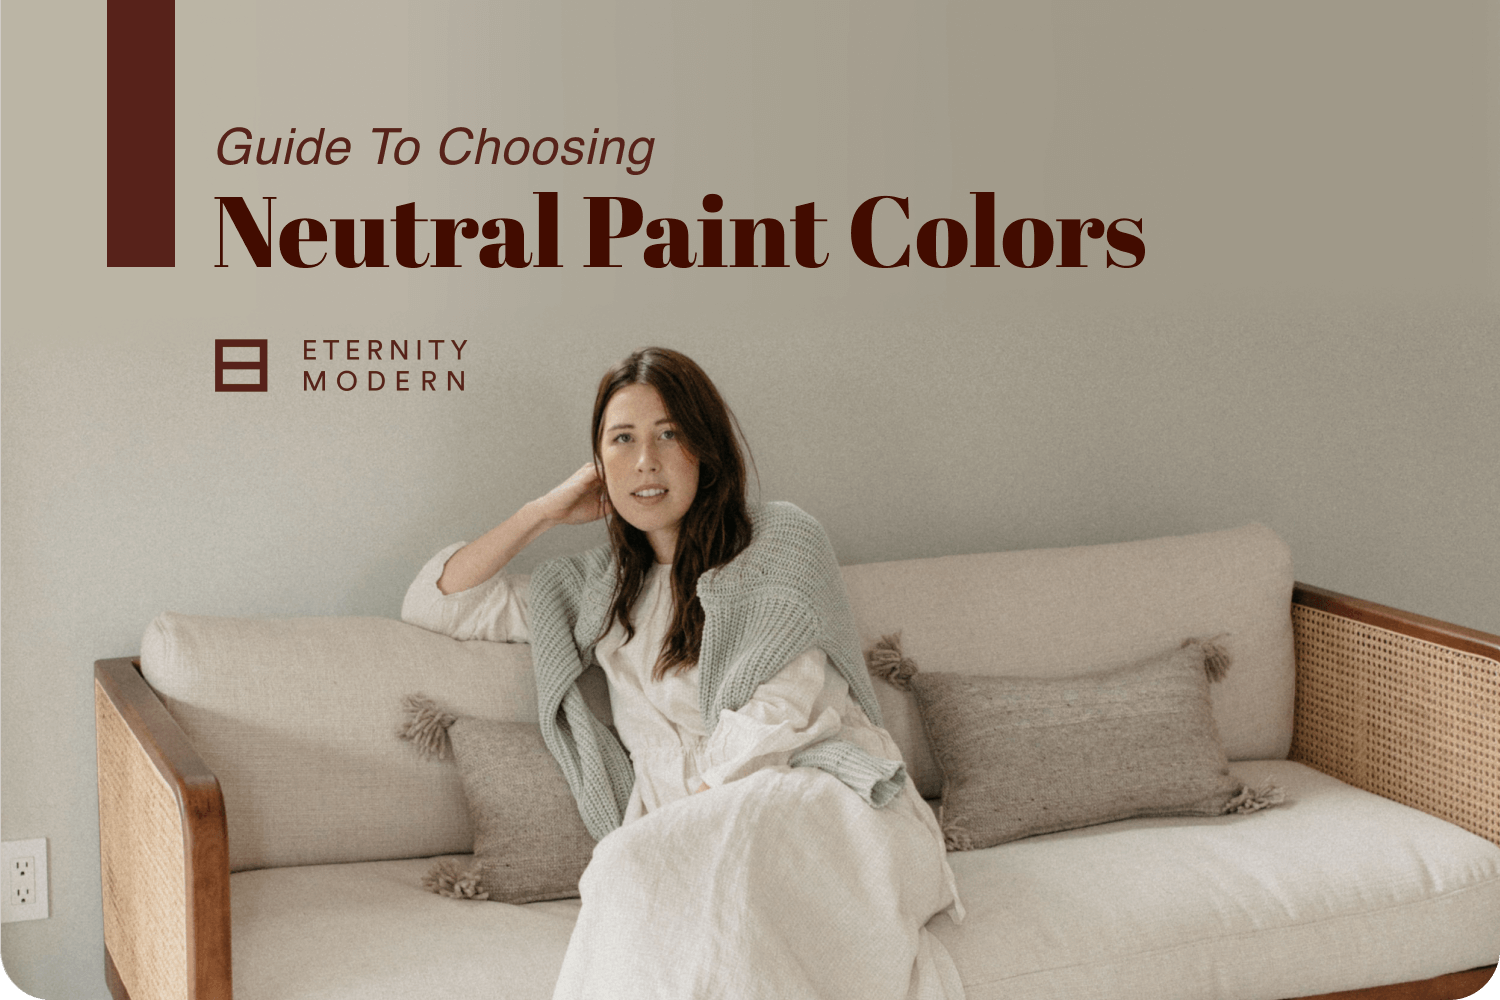 Guide to Choosing Neutral Paint Colors